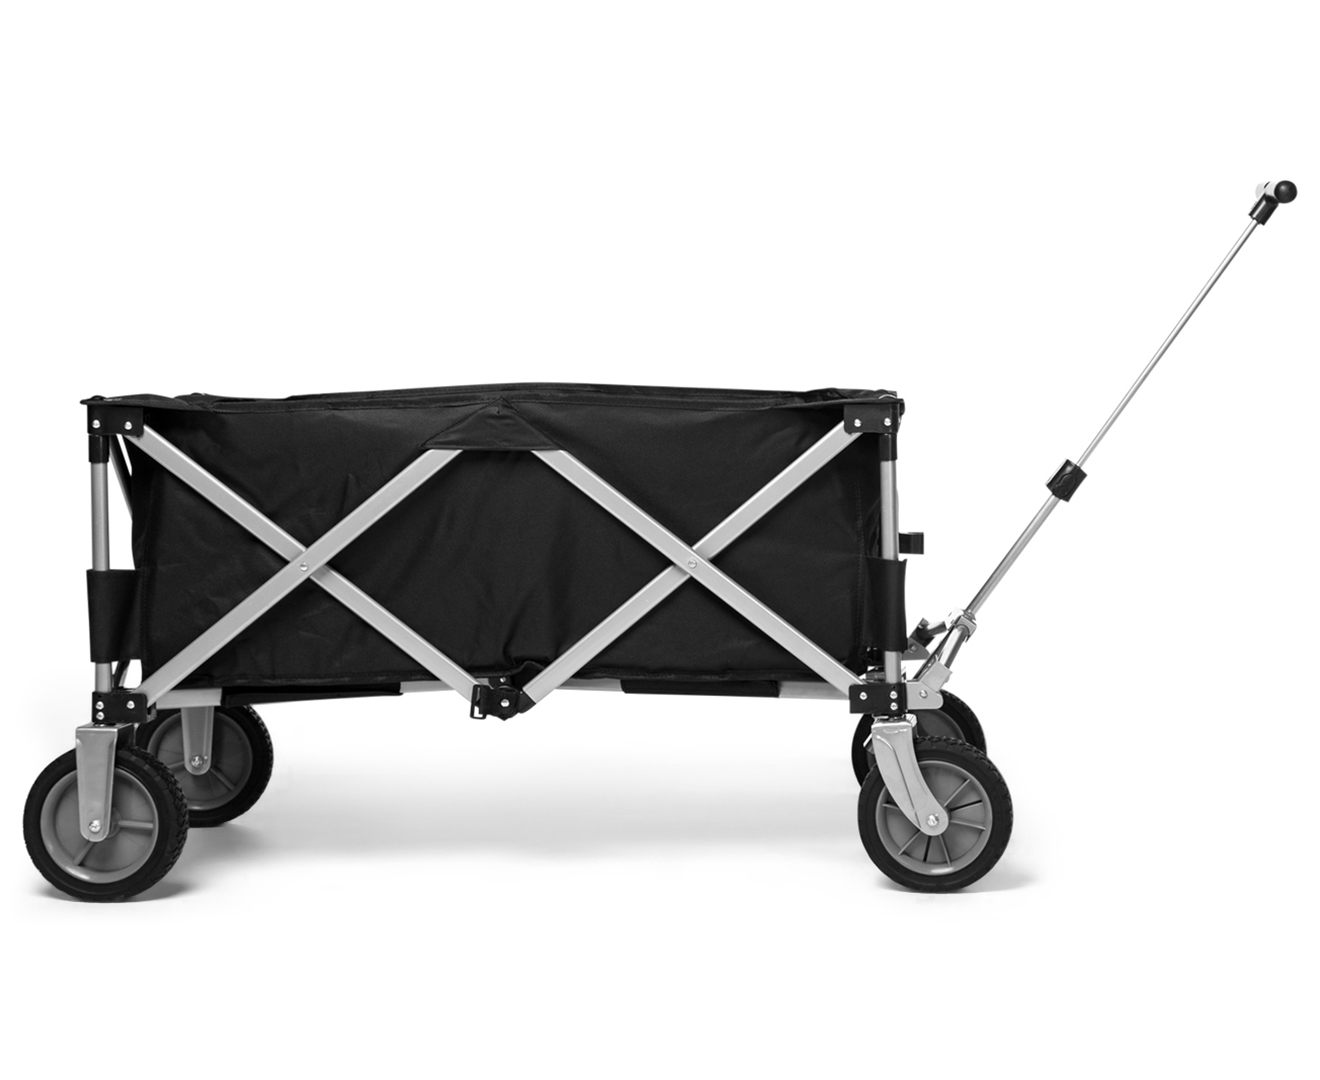 Black Camping Heavy Duty Garden Cart for Beach Yard with Universal Wheels & Adjustable Handle TINVHY Collapsible Folding Outdoor Beach Utility Wagon Cart 